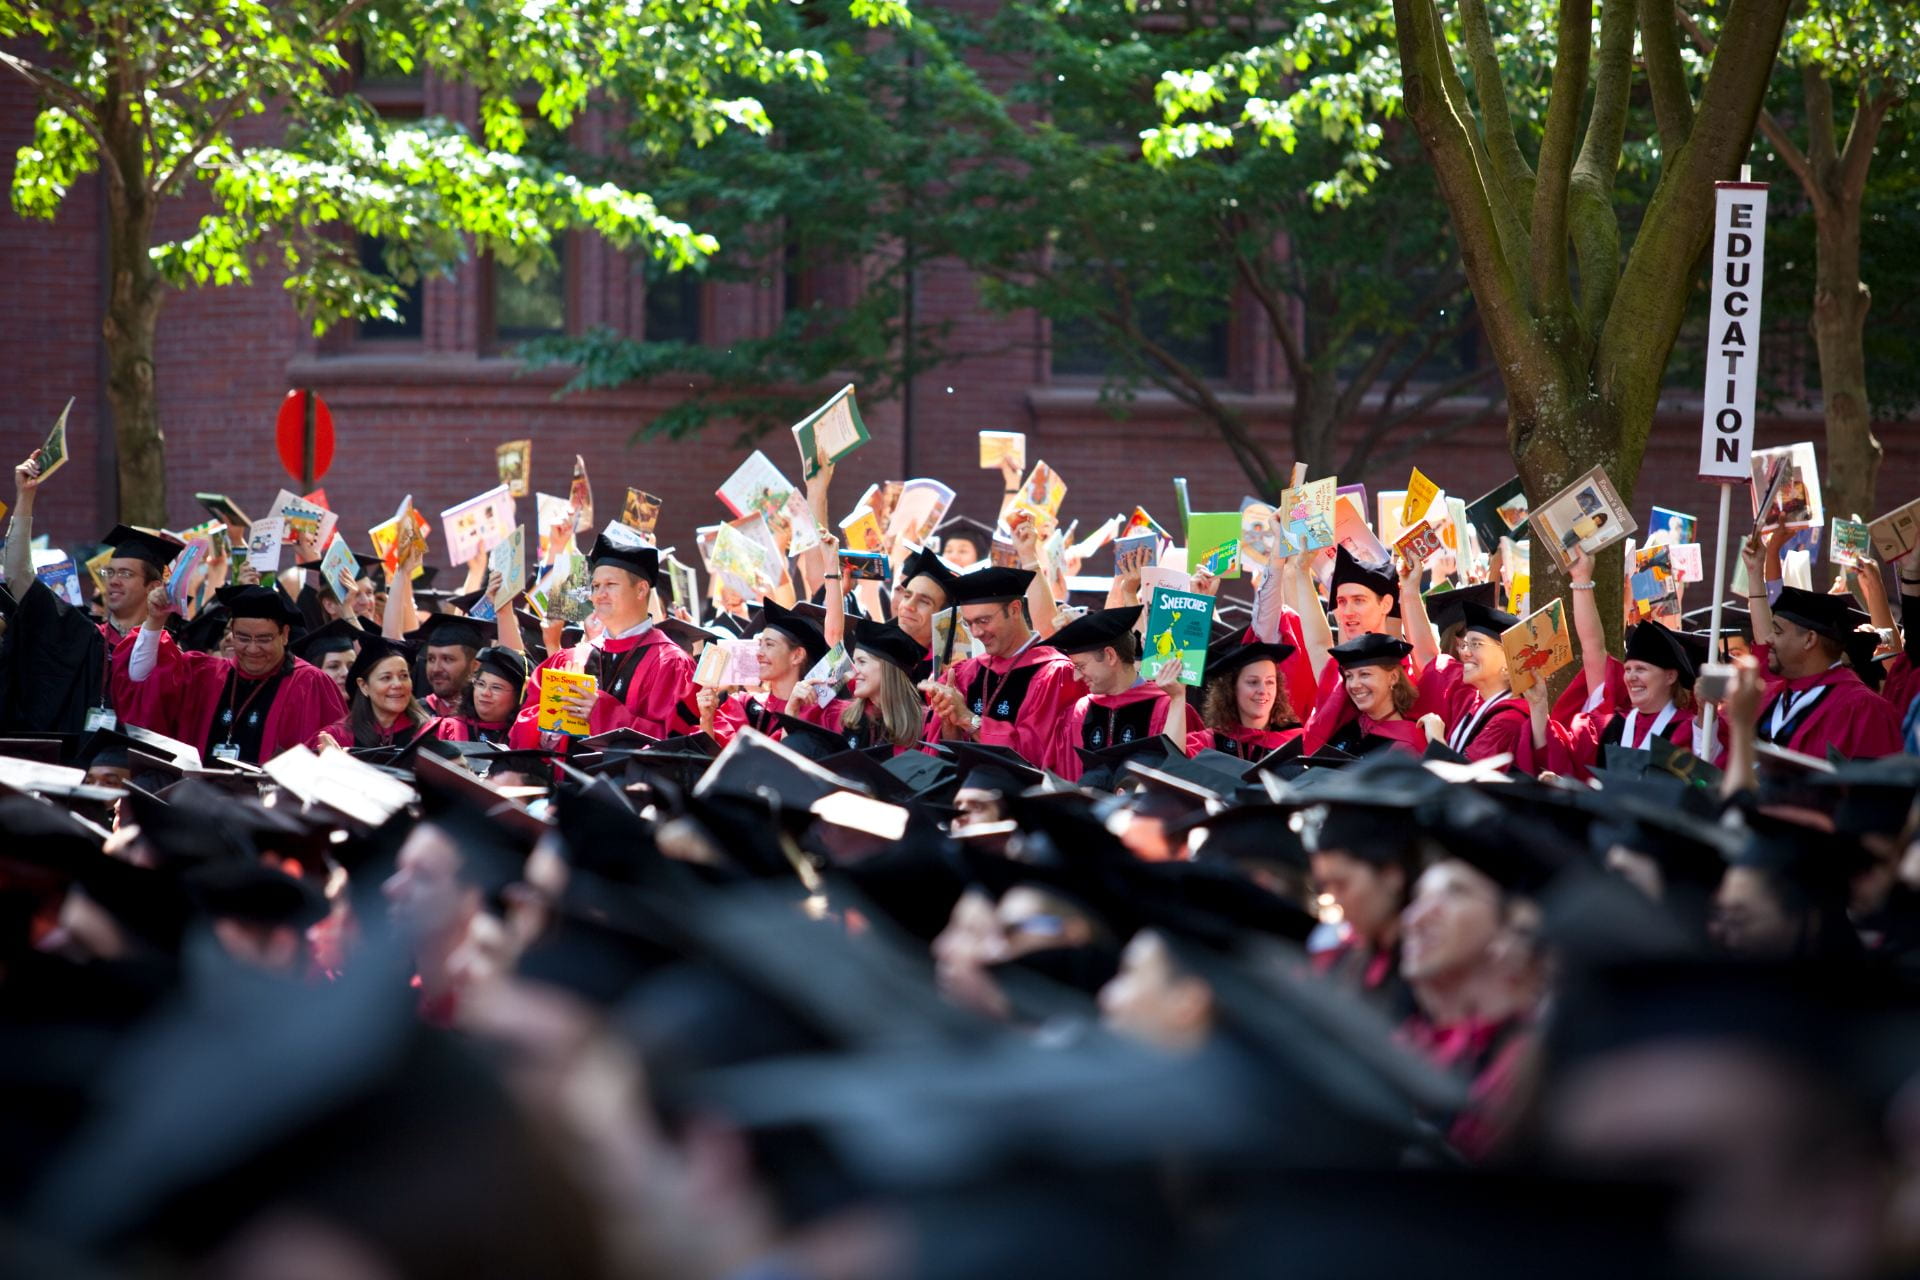 A view of graduates across Harvard Yard, wearing caps and gowns.